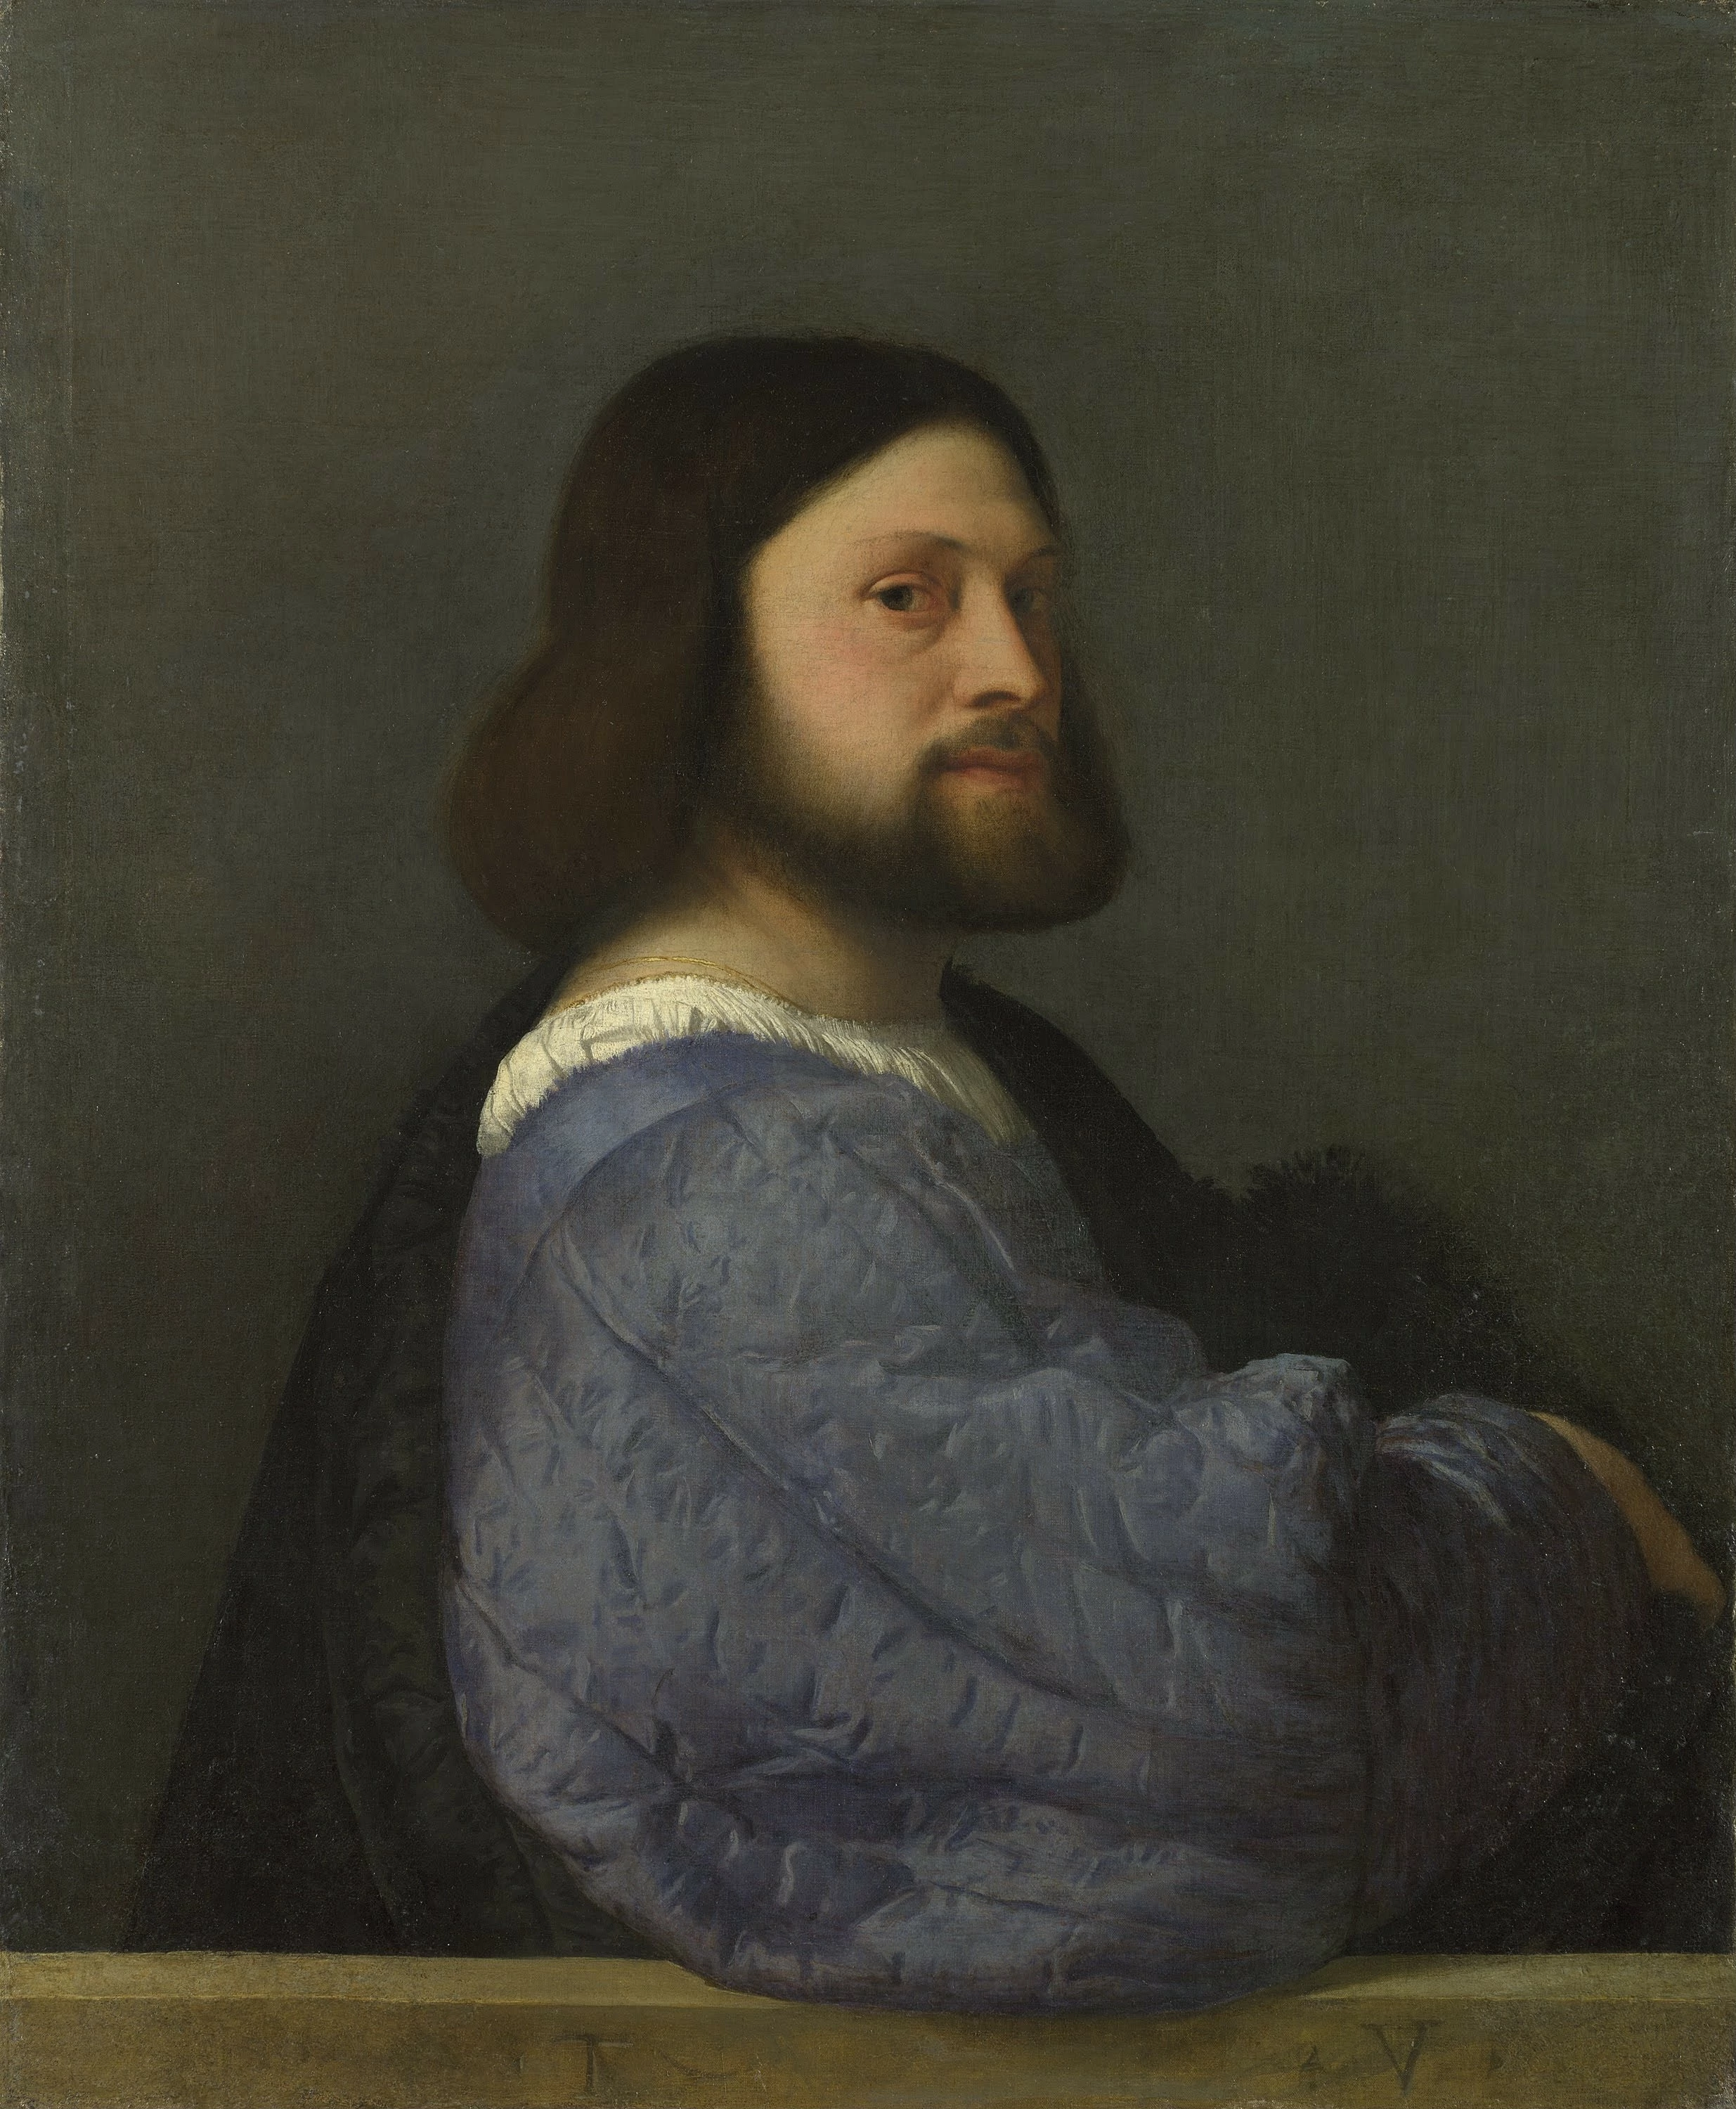 Man with a Quilted Sleeve, Titian